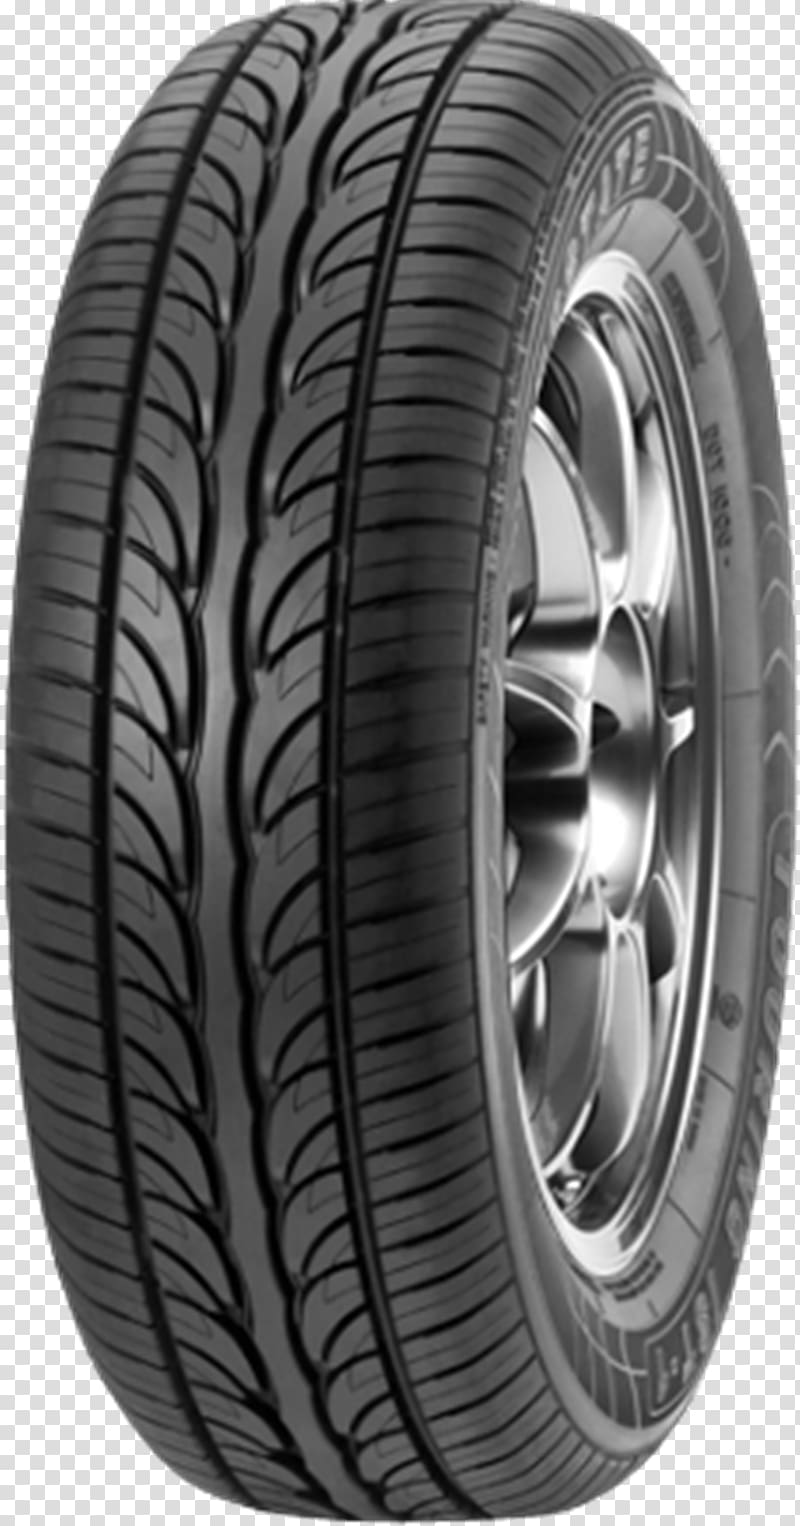 Car Toyota Land Cruiser Hankook Tire Radial tire, car transparent background PNG clipart